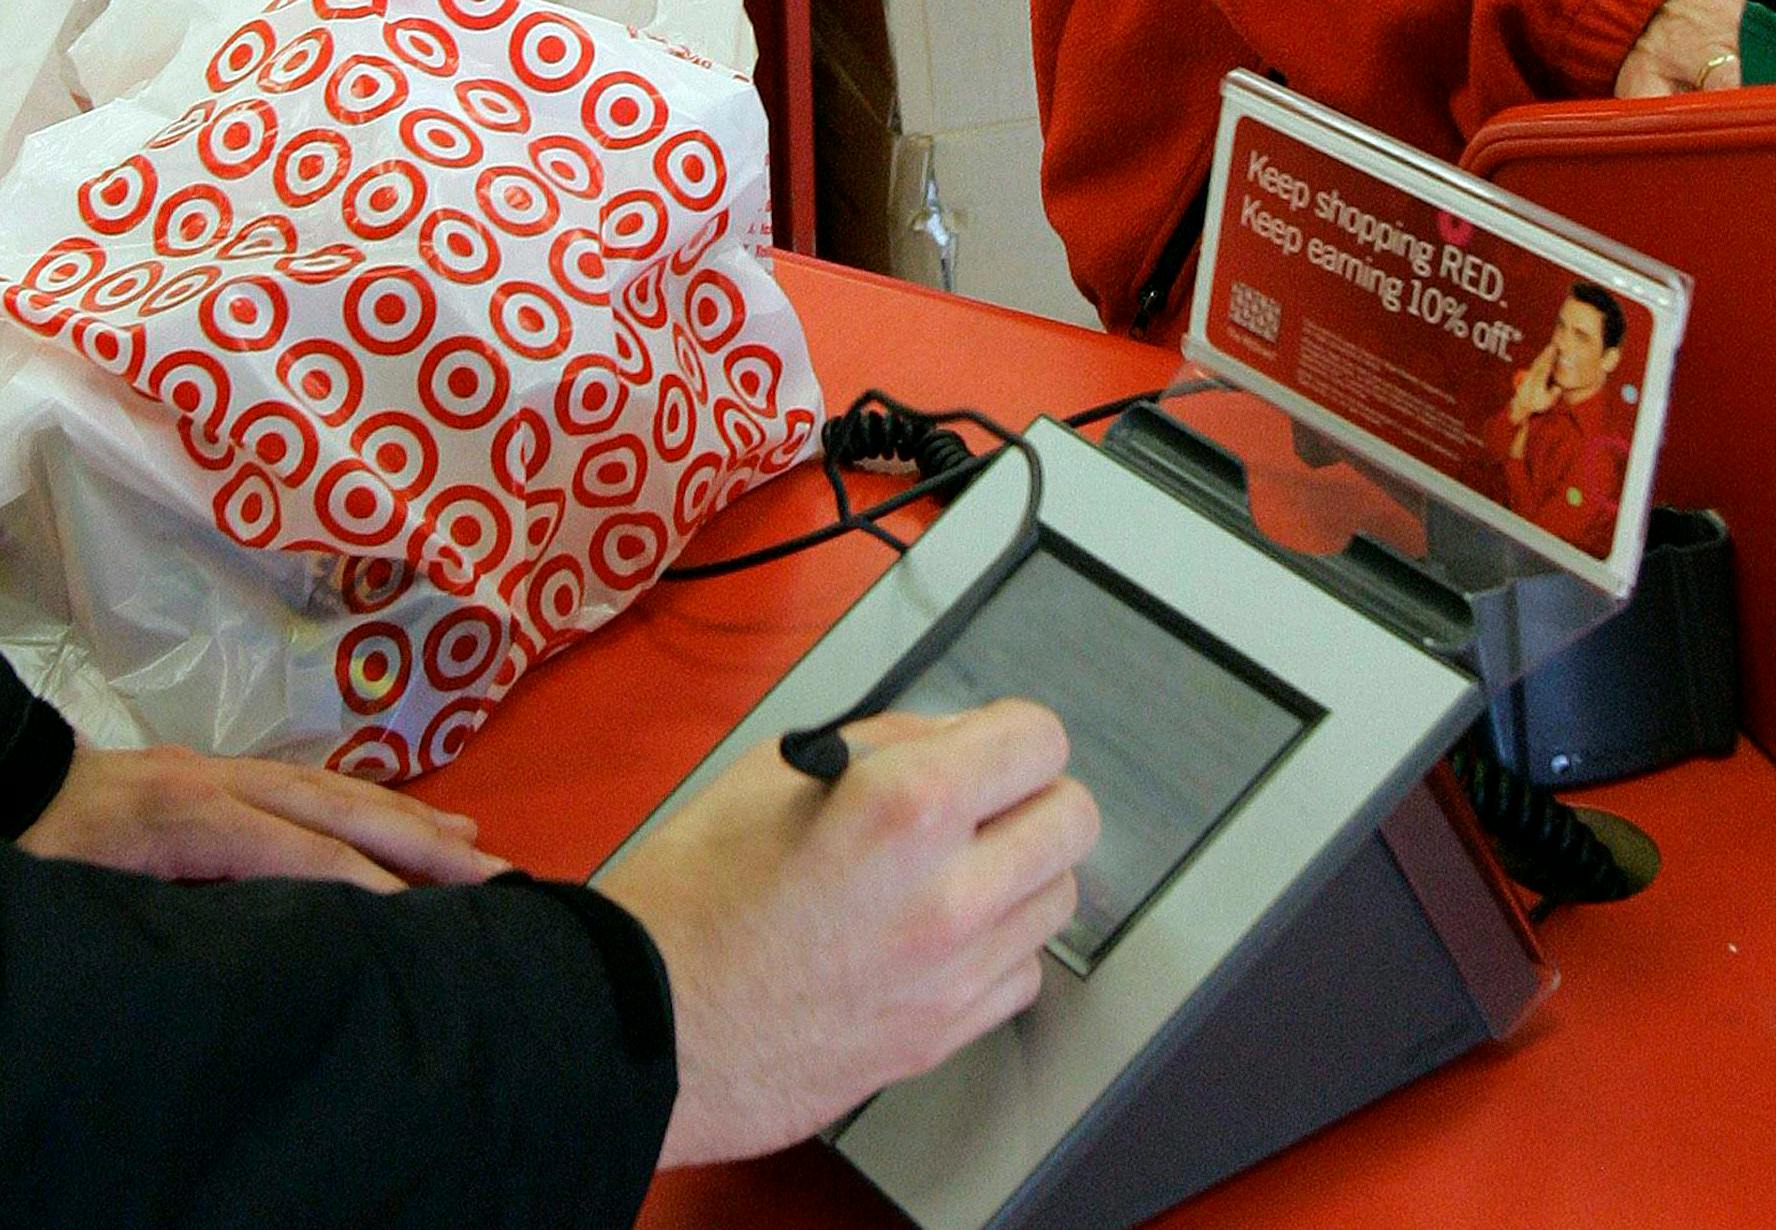 Target said Friday that the data breach puts up to 110 million people at risk.